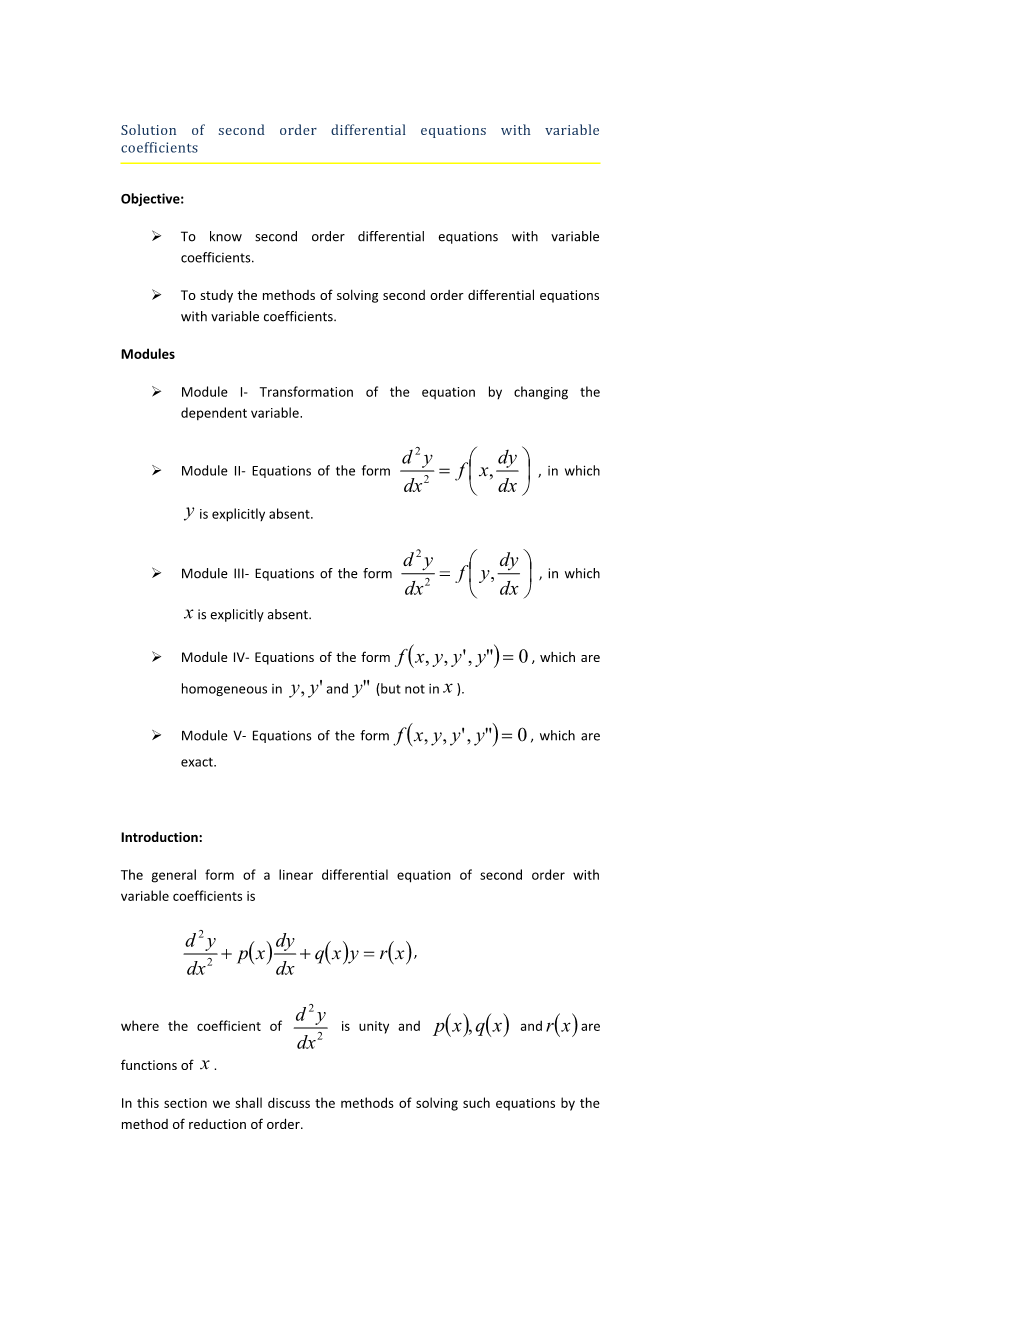 Solution of Second Order Differential Equations with Variable Coefficients